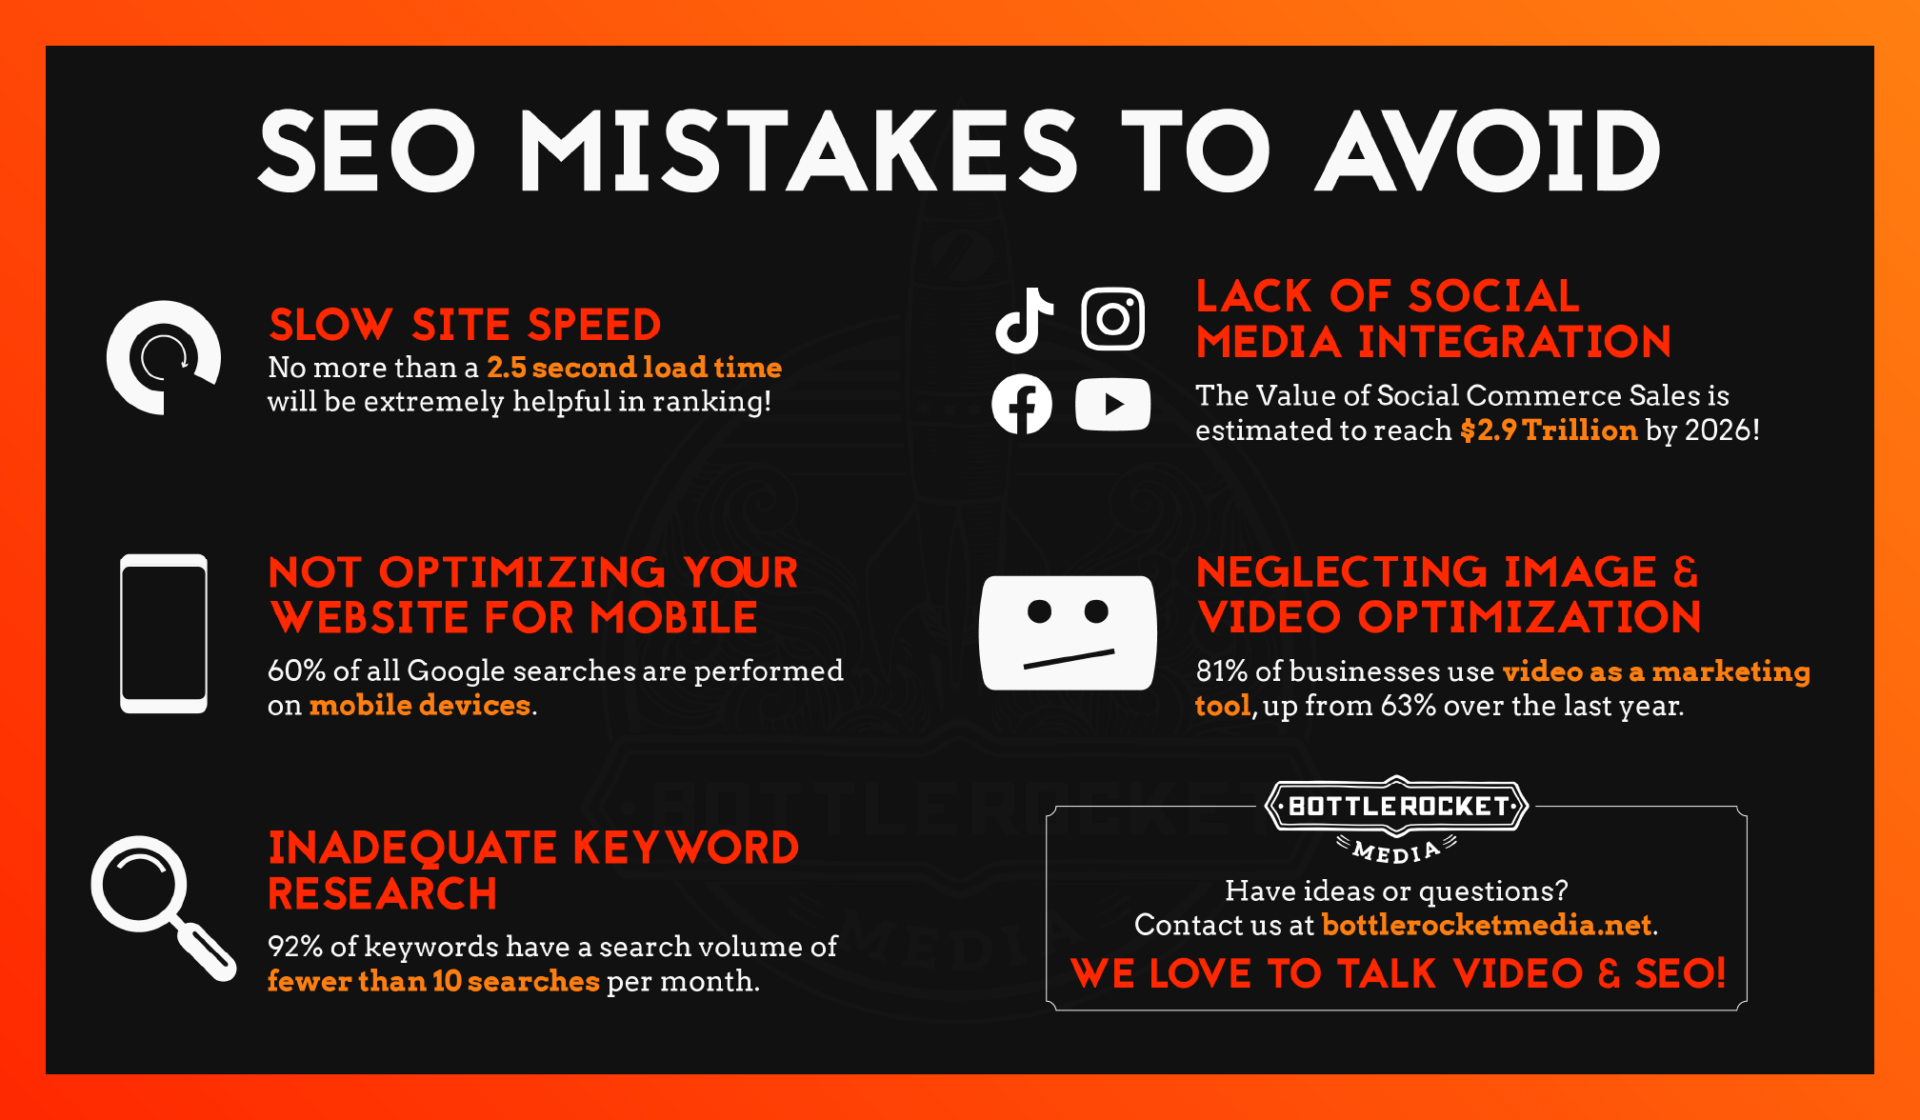 13 Common SEO Mistakes to Avoid and Bottle Rocket Media